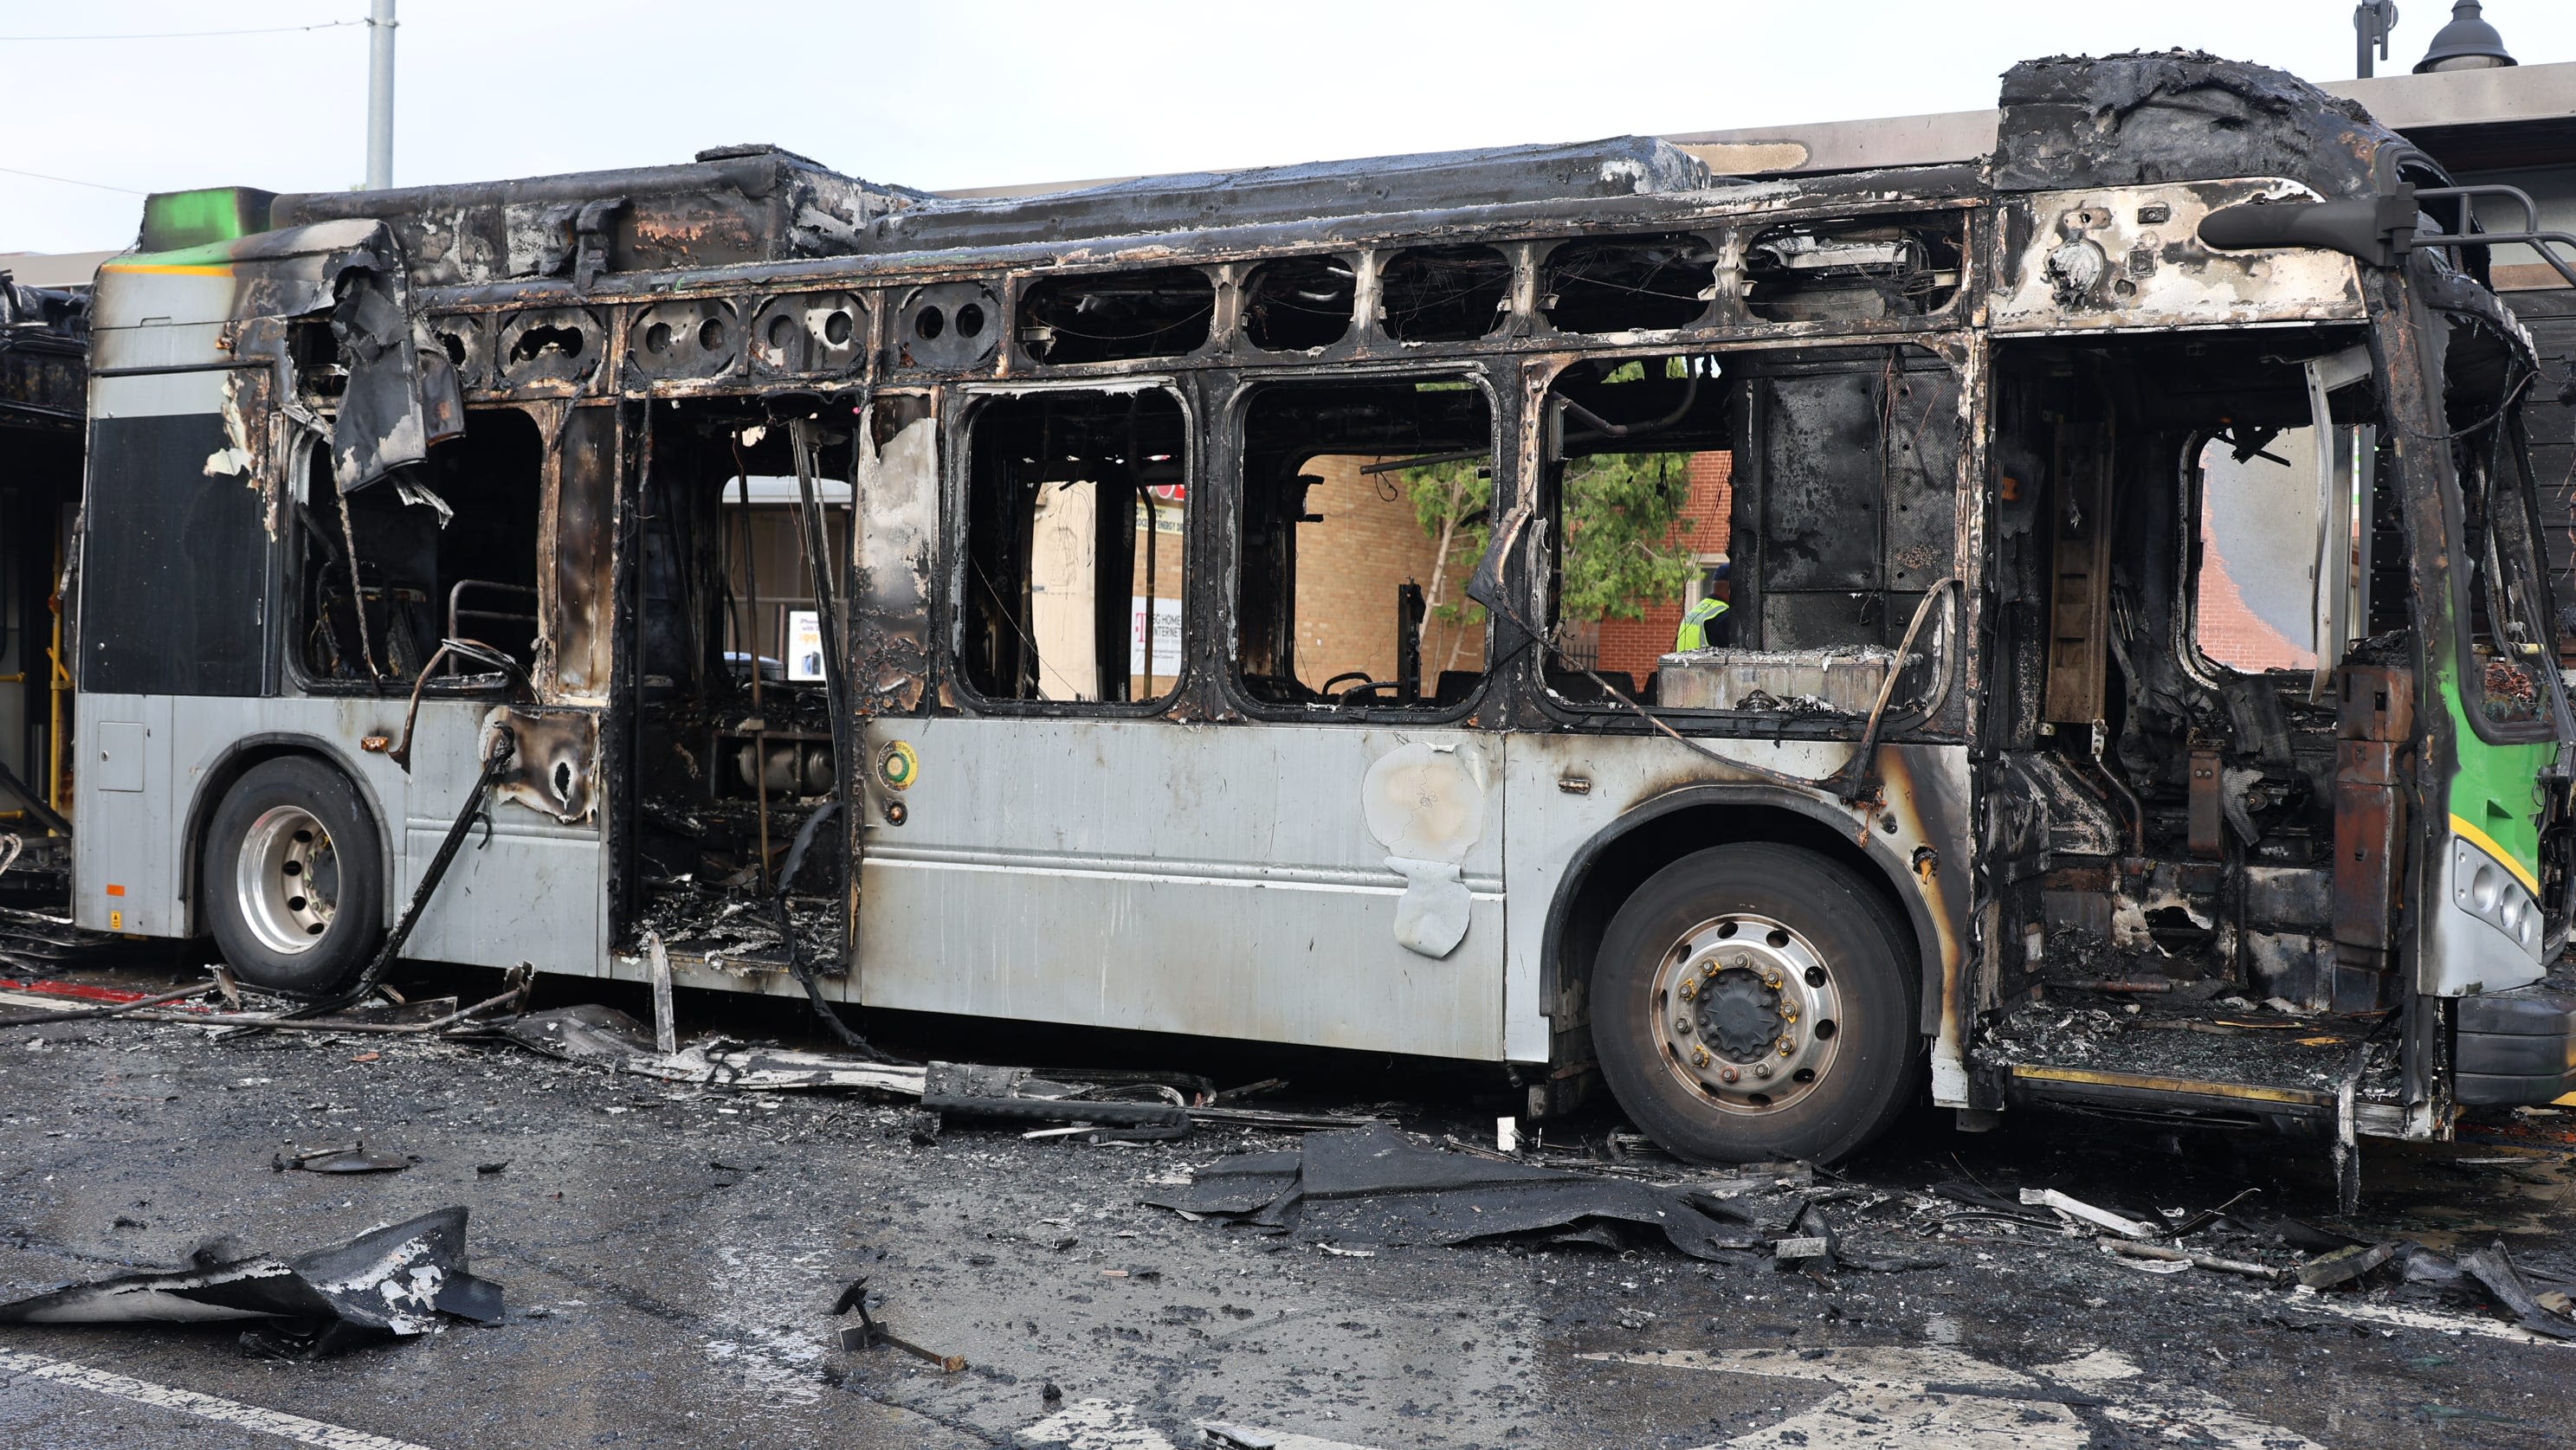 Man accused of lighting fire on IndyGo bus faces federal charge